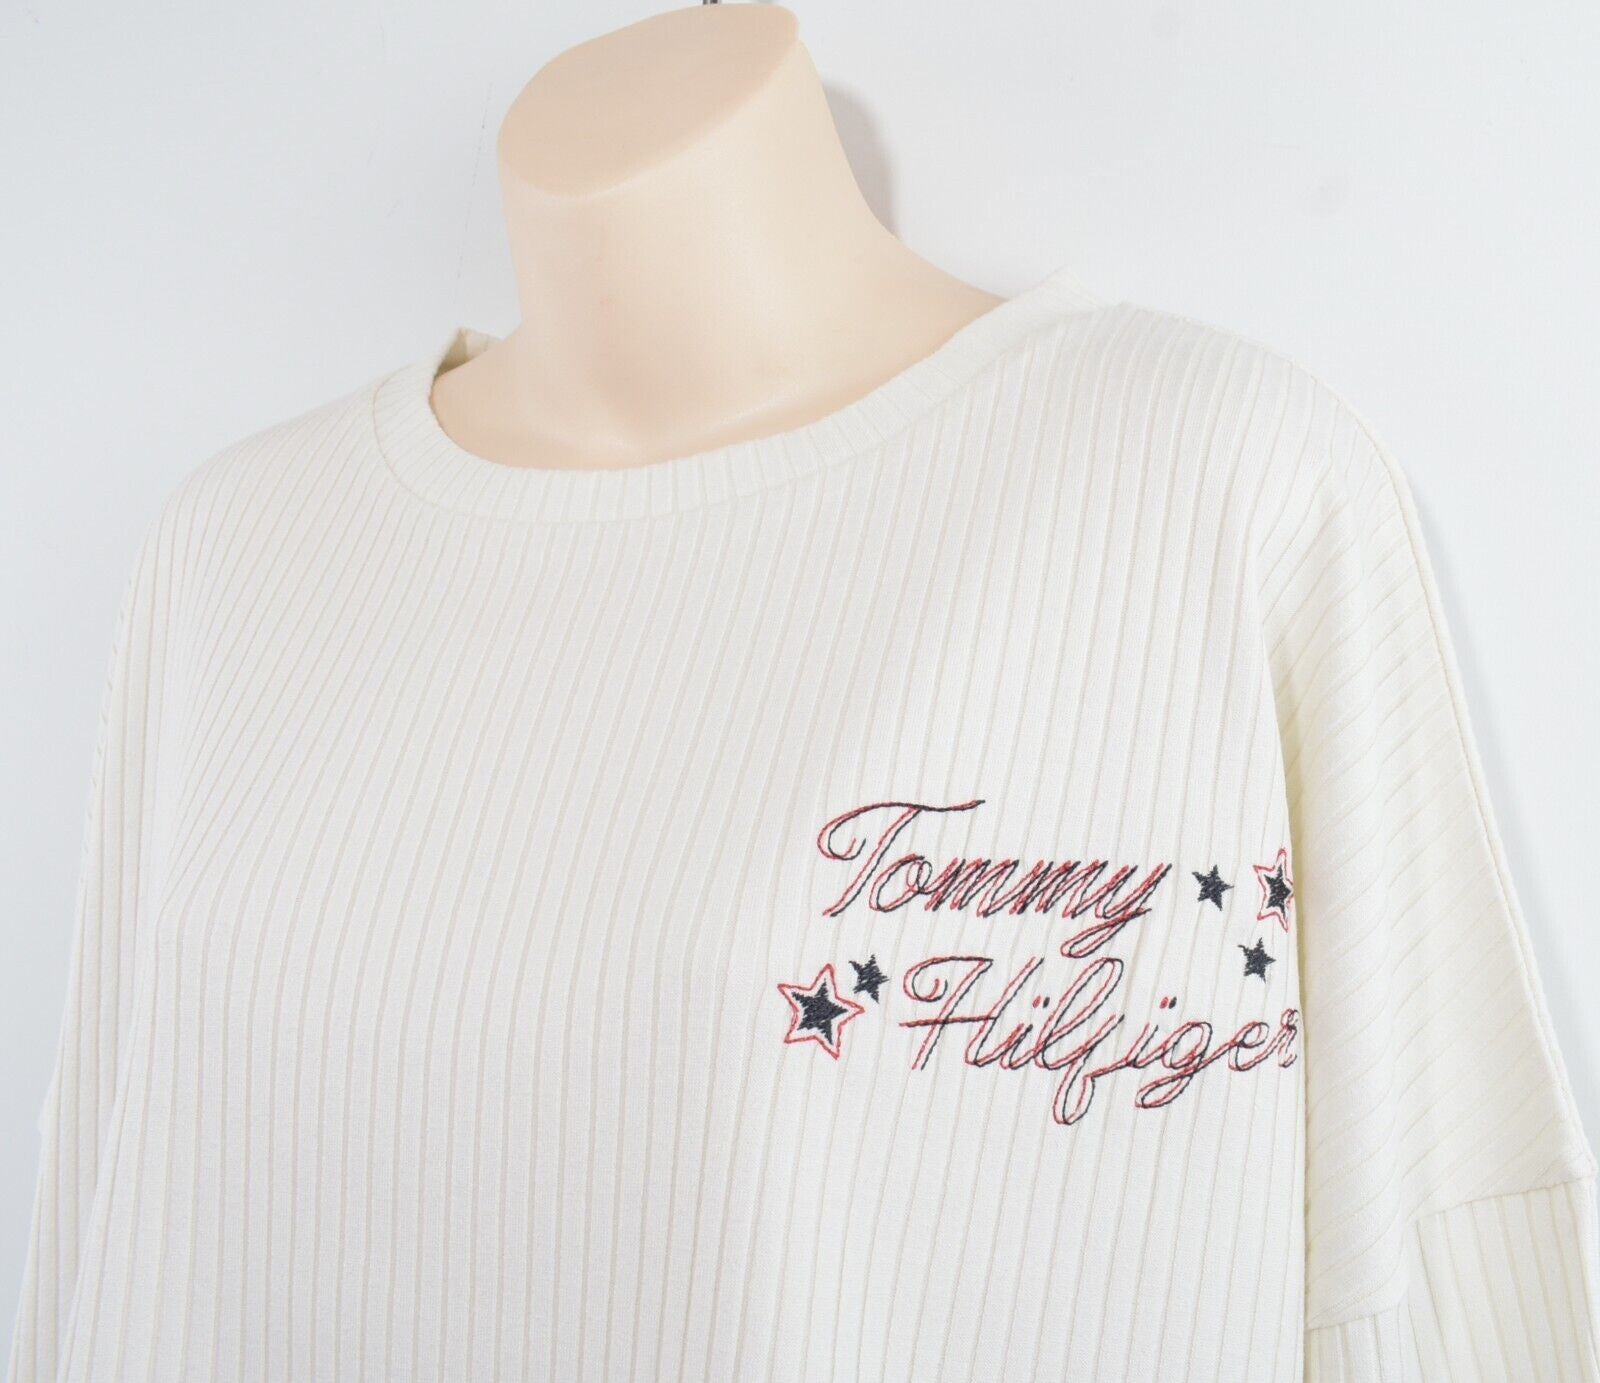 TOMMY HILFIGER Women's Girls' Long Sleeve Ribbed Cropped Top, Ivory, size S